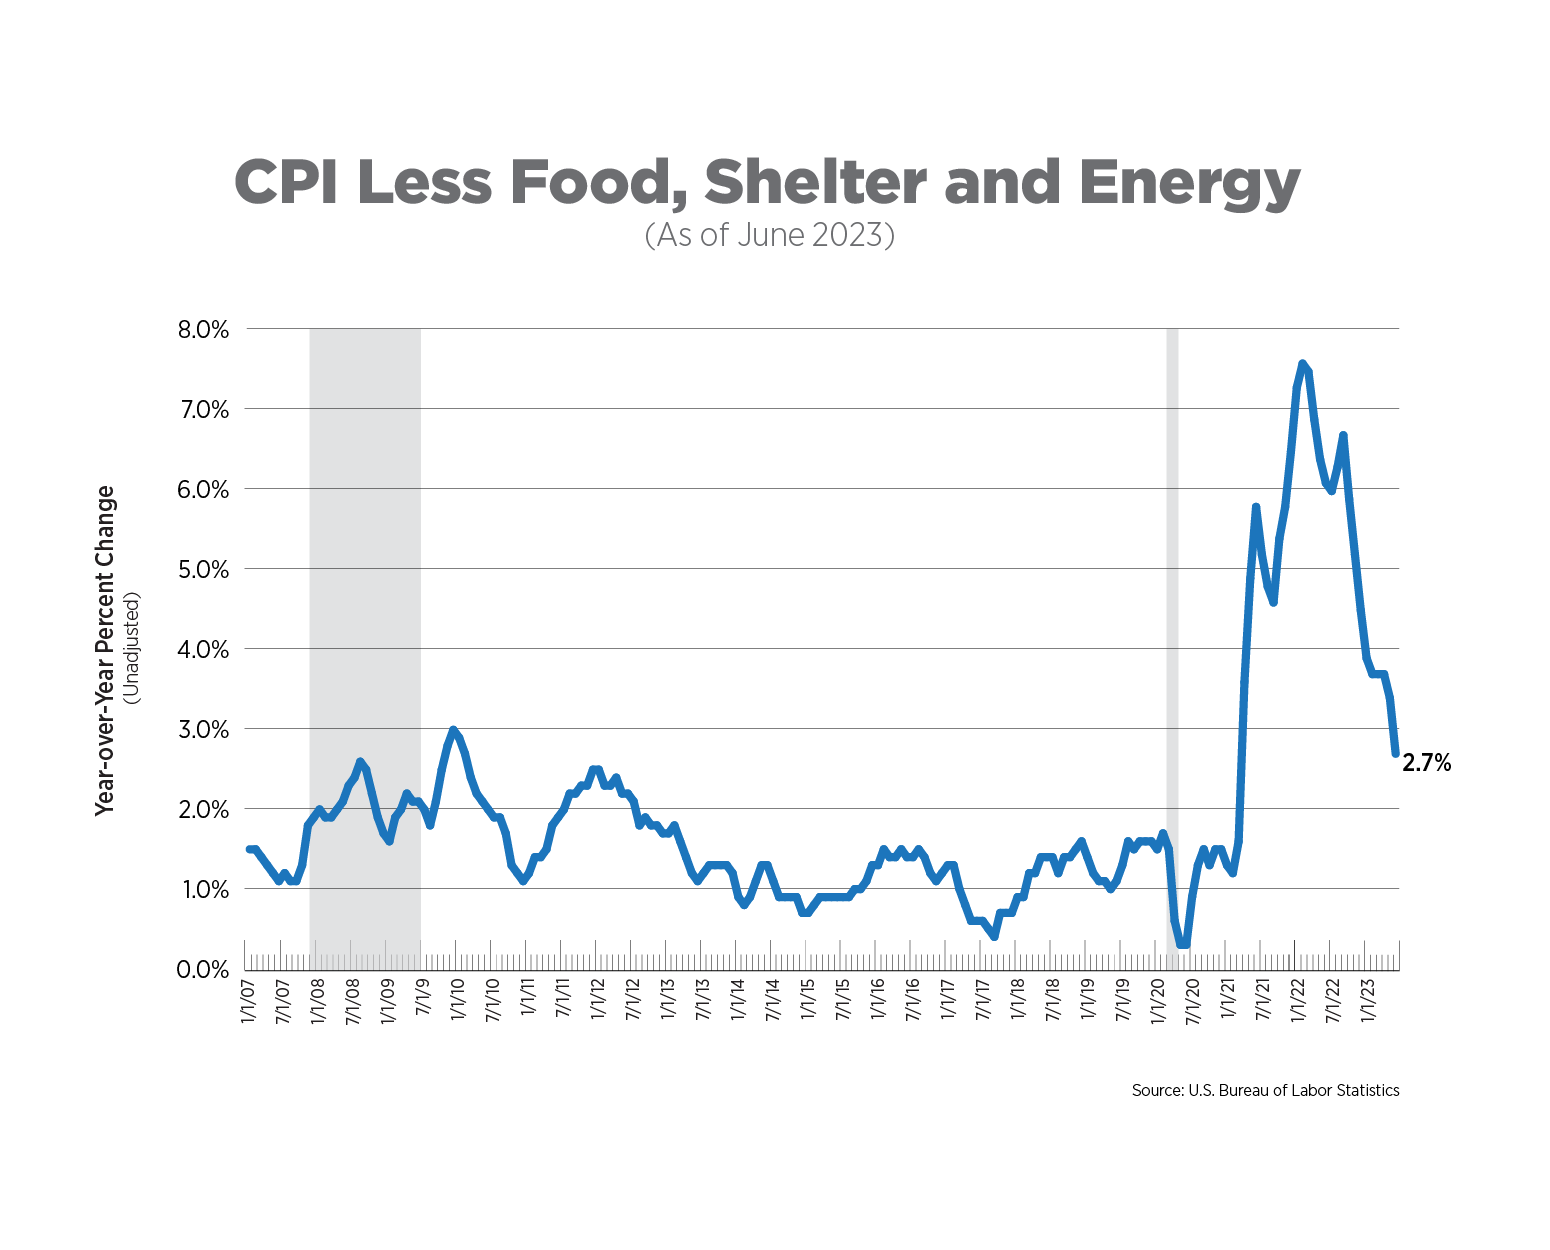 cpi less food, shelter, and energy as of june 2023